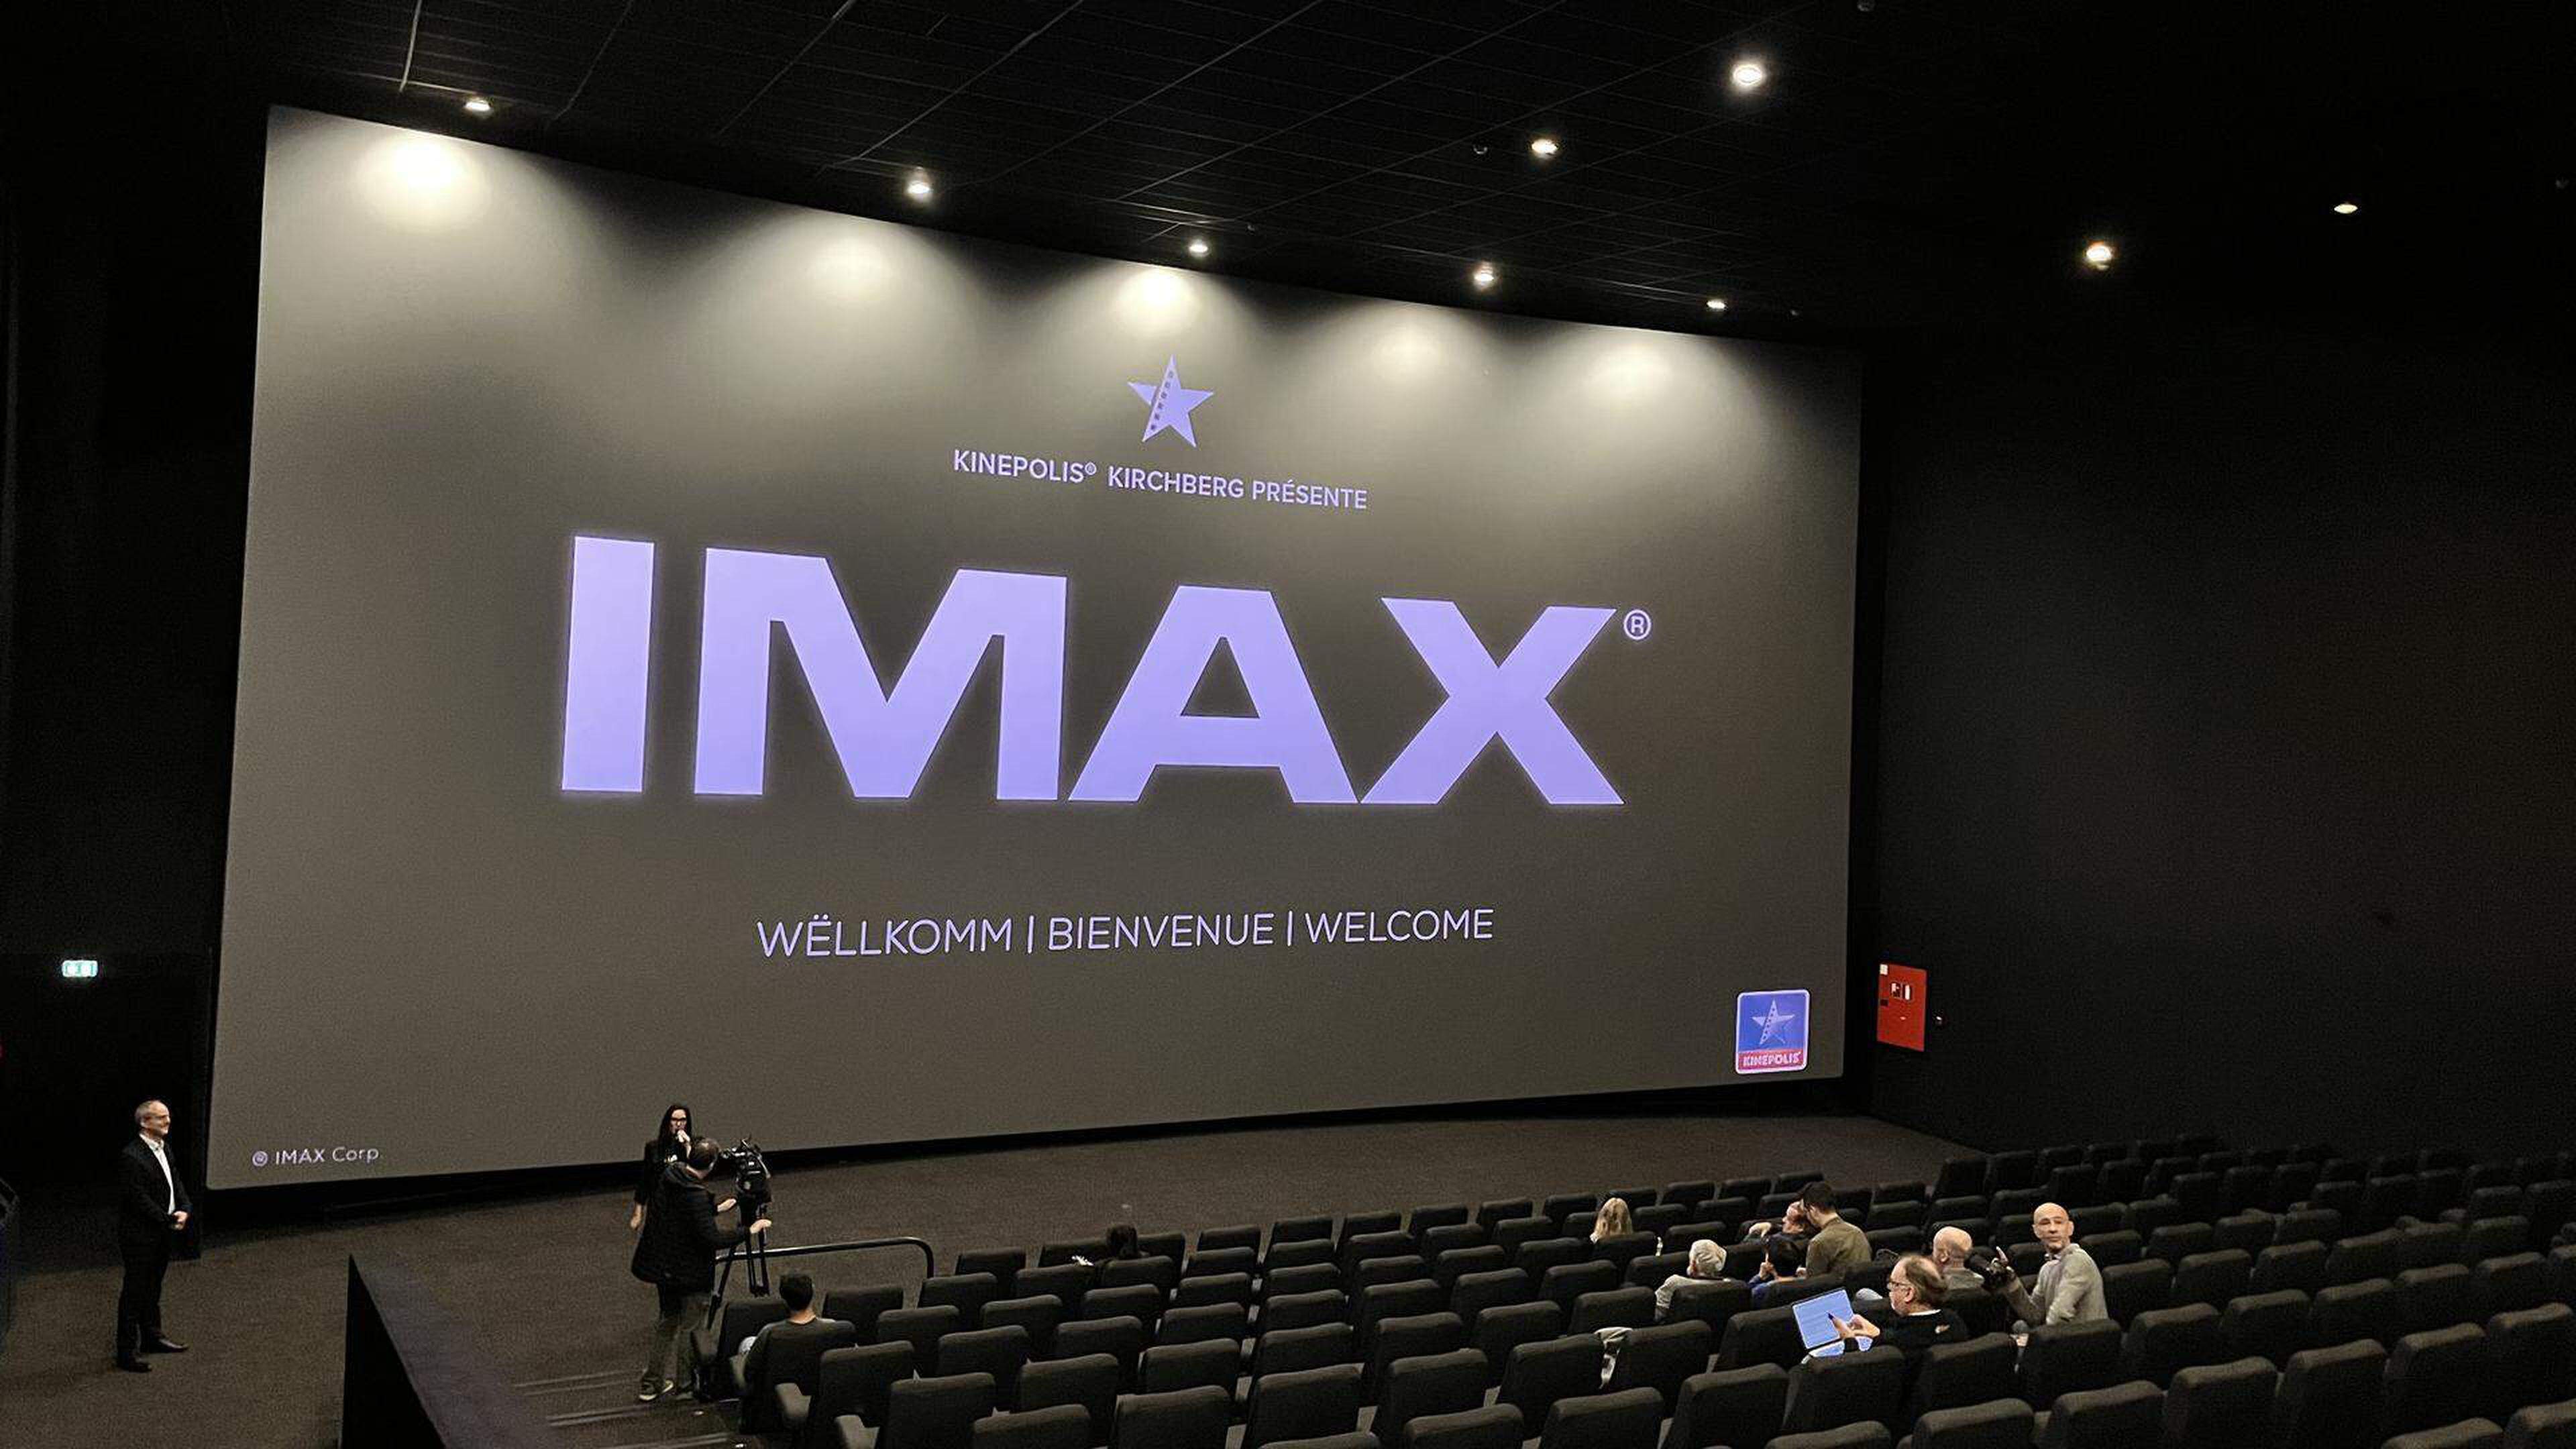 The Imax screen at Kinepolis in Kirchberg is roughly as wide as the length of a tennis court. 